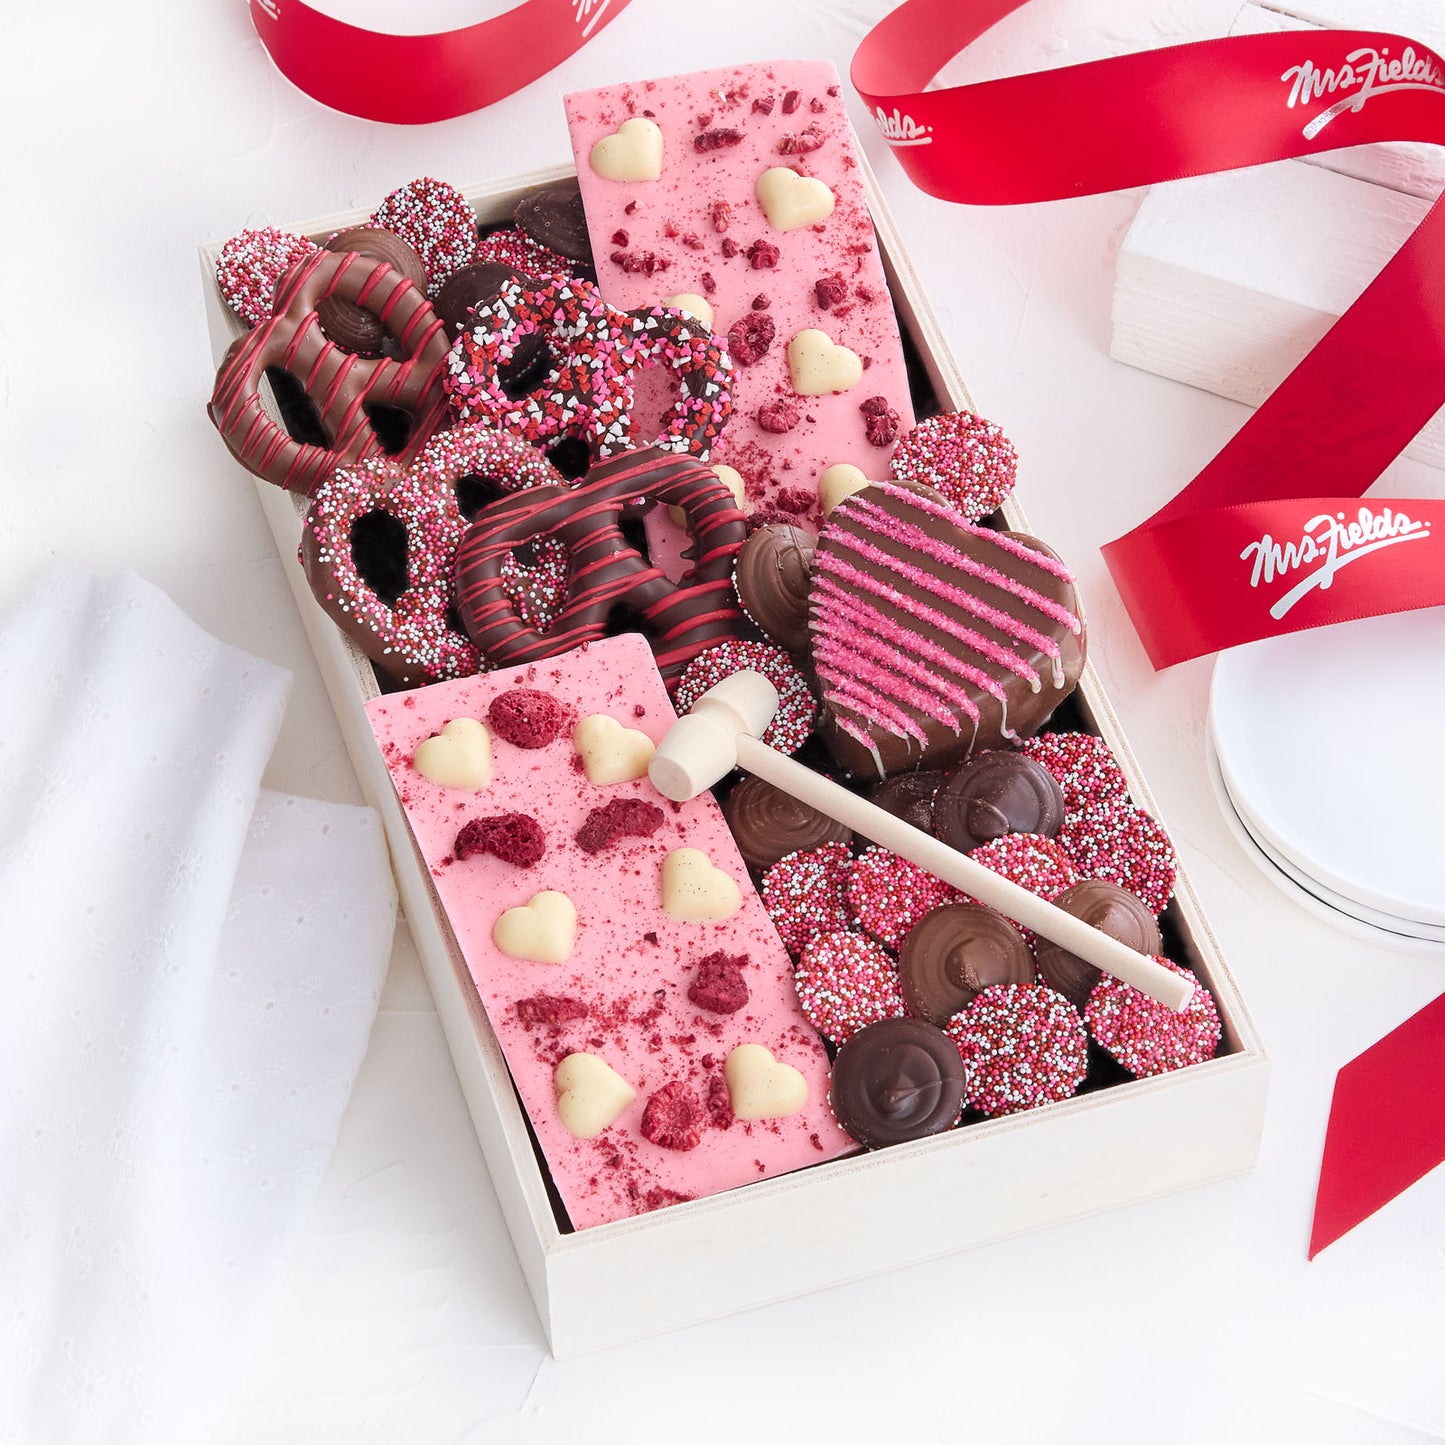 Valentine's Day themed chocolates and chocolate covered pretzels in a tray